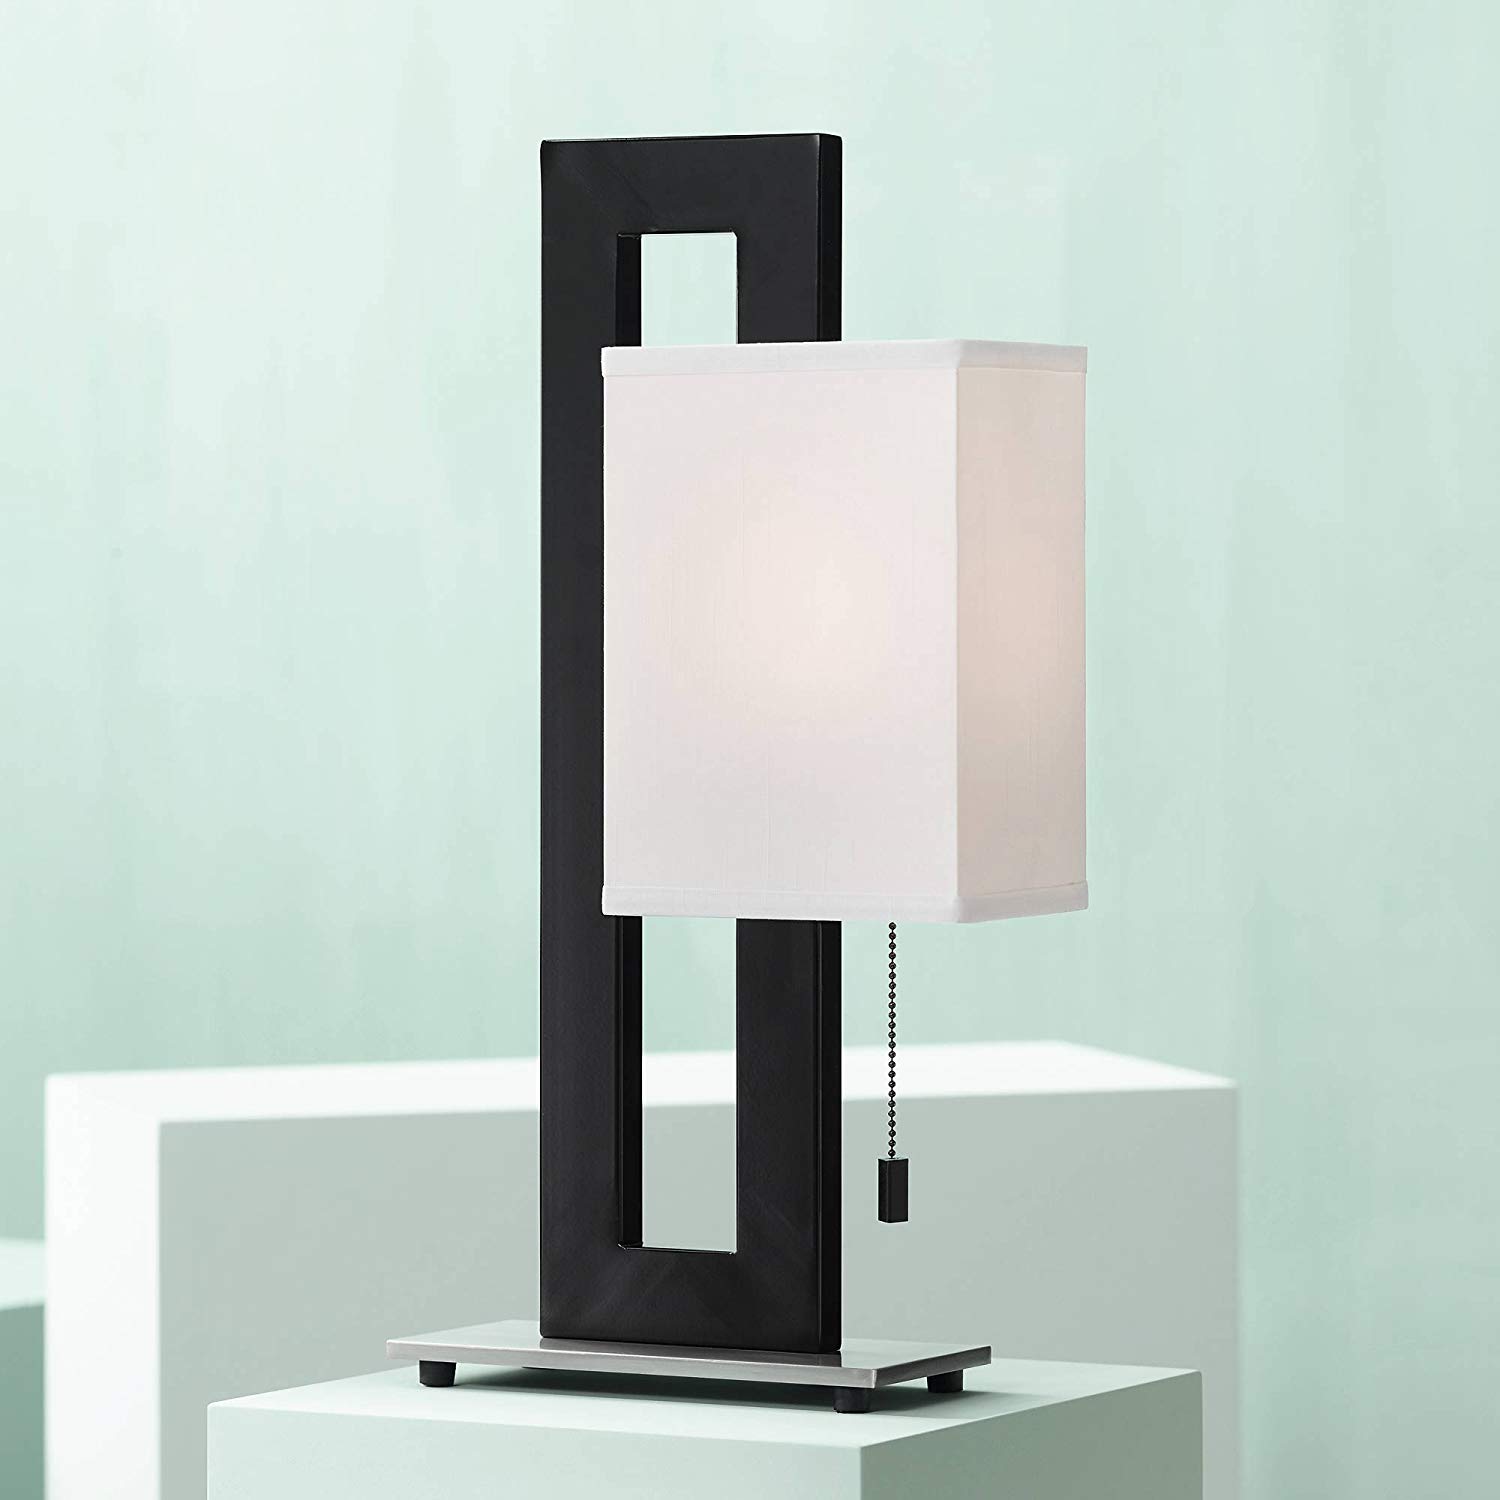 Floating Square Modern Accent Table Lamp Black Metal Rectangular White Box Shade for Living Room Family Bedroom Bedside